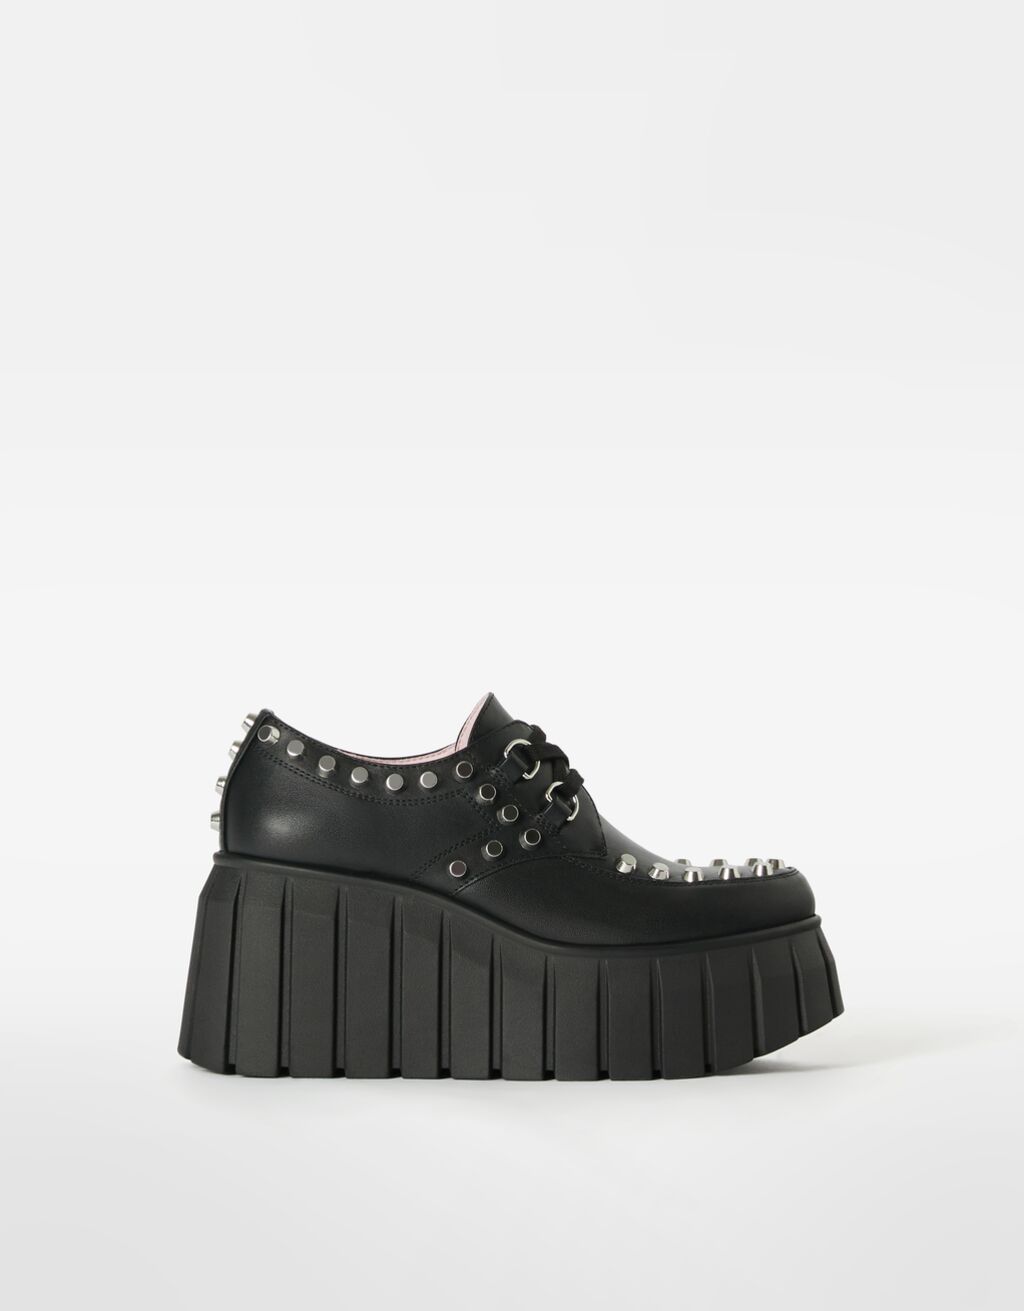 Lace-up platform shoes with studs